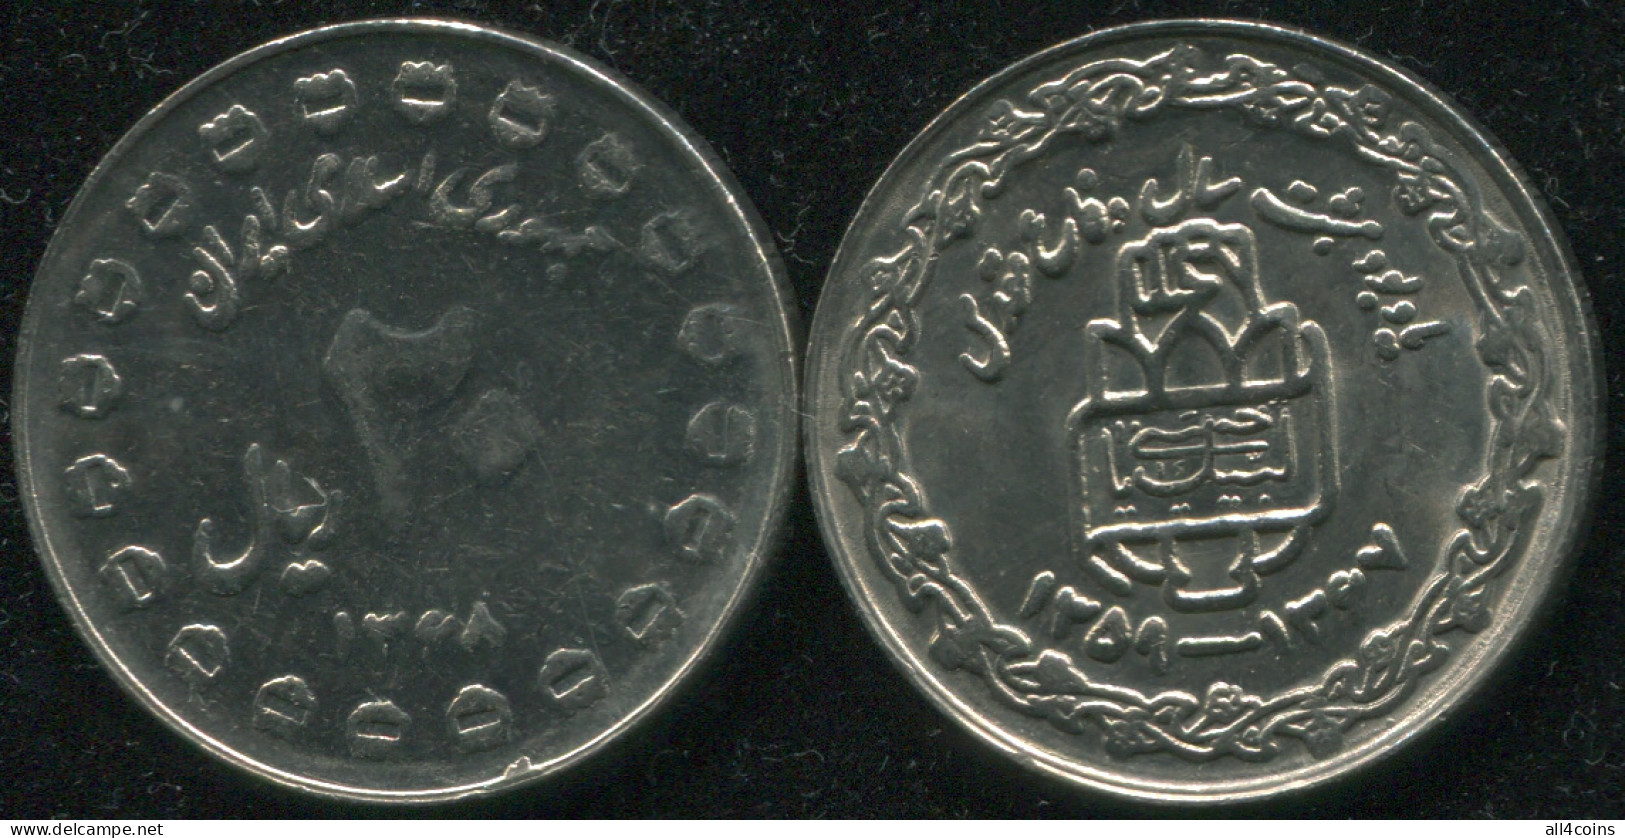 Persia. 20 Rials. 1989 (Coin KM#1254. Unc) 8 Years Of Sacred Defense - Iran